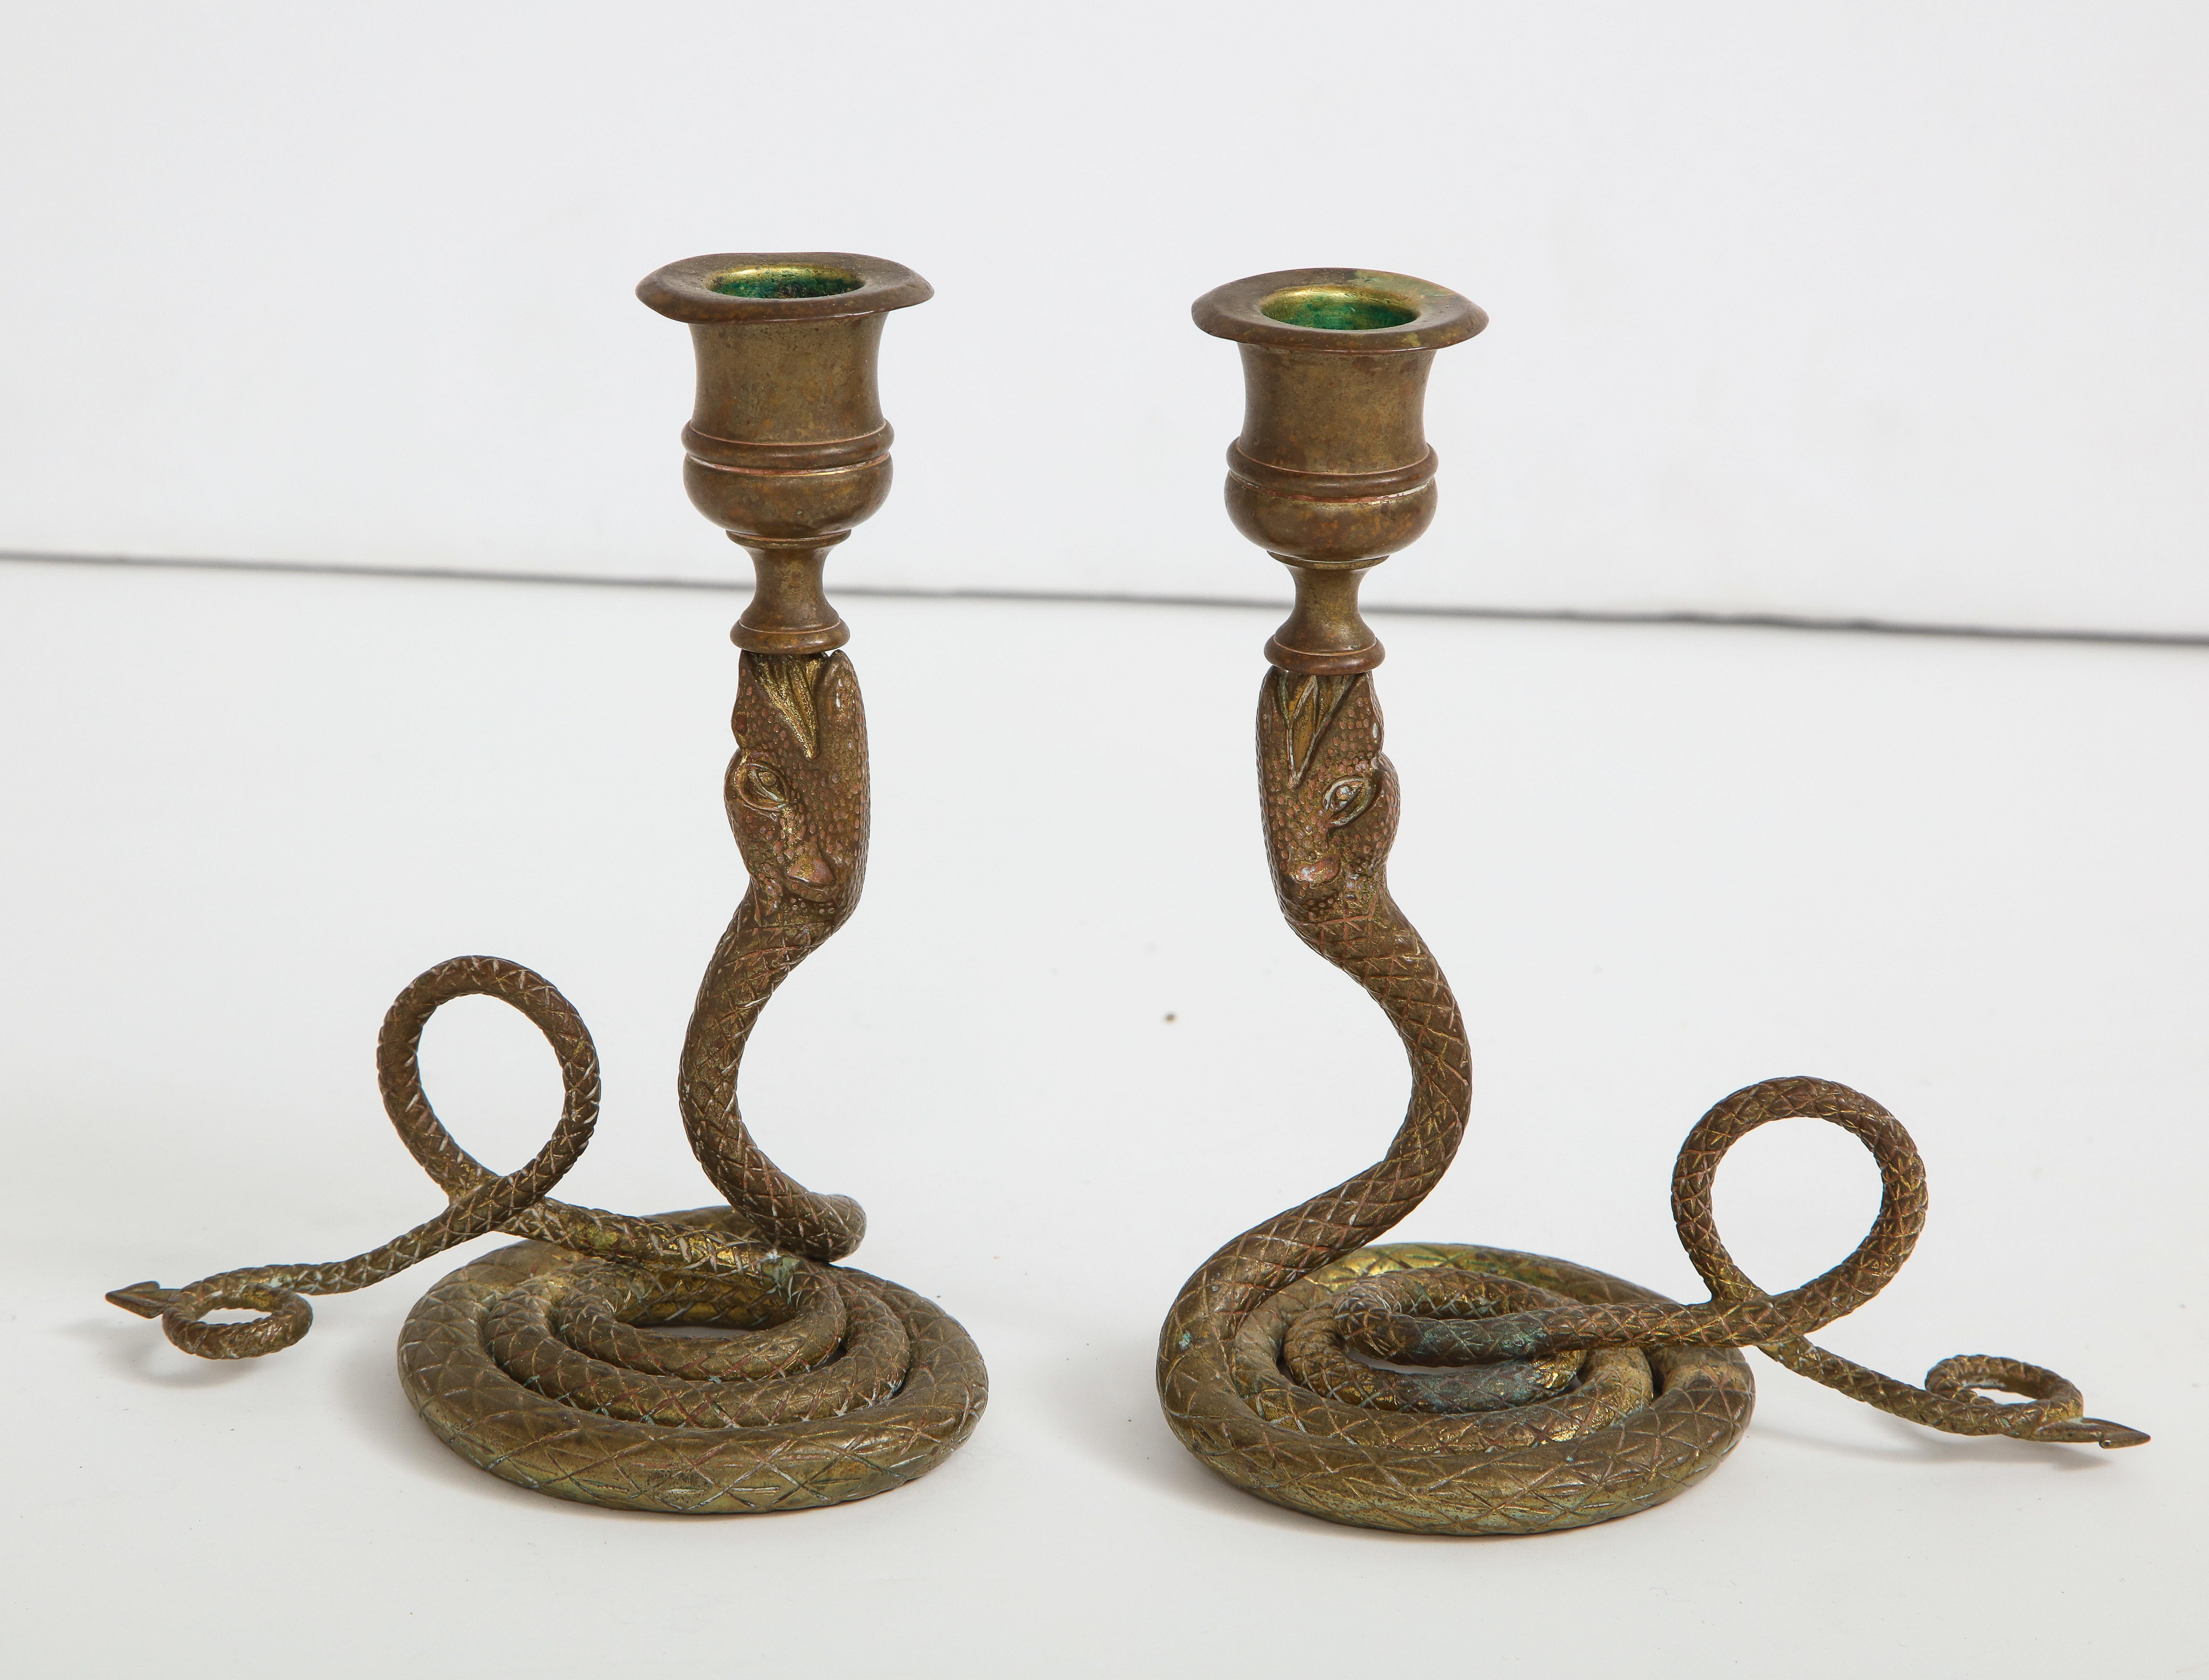 Exquisite pair of Art Deco brass Cobra candlesticks with scaled and coiled bodies.